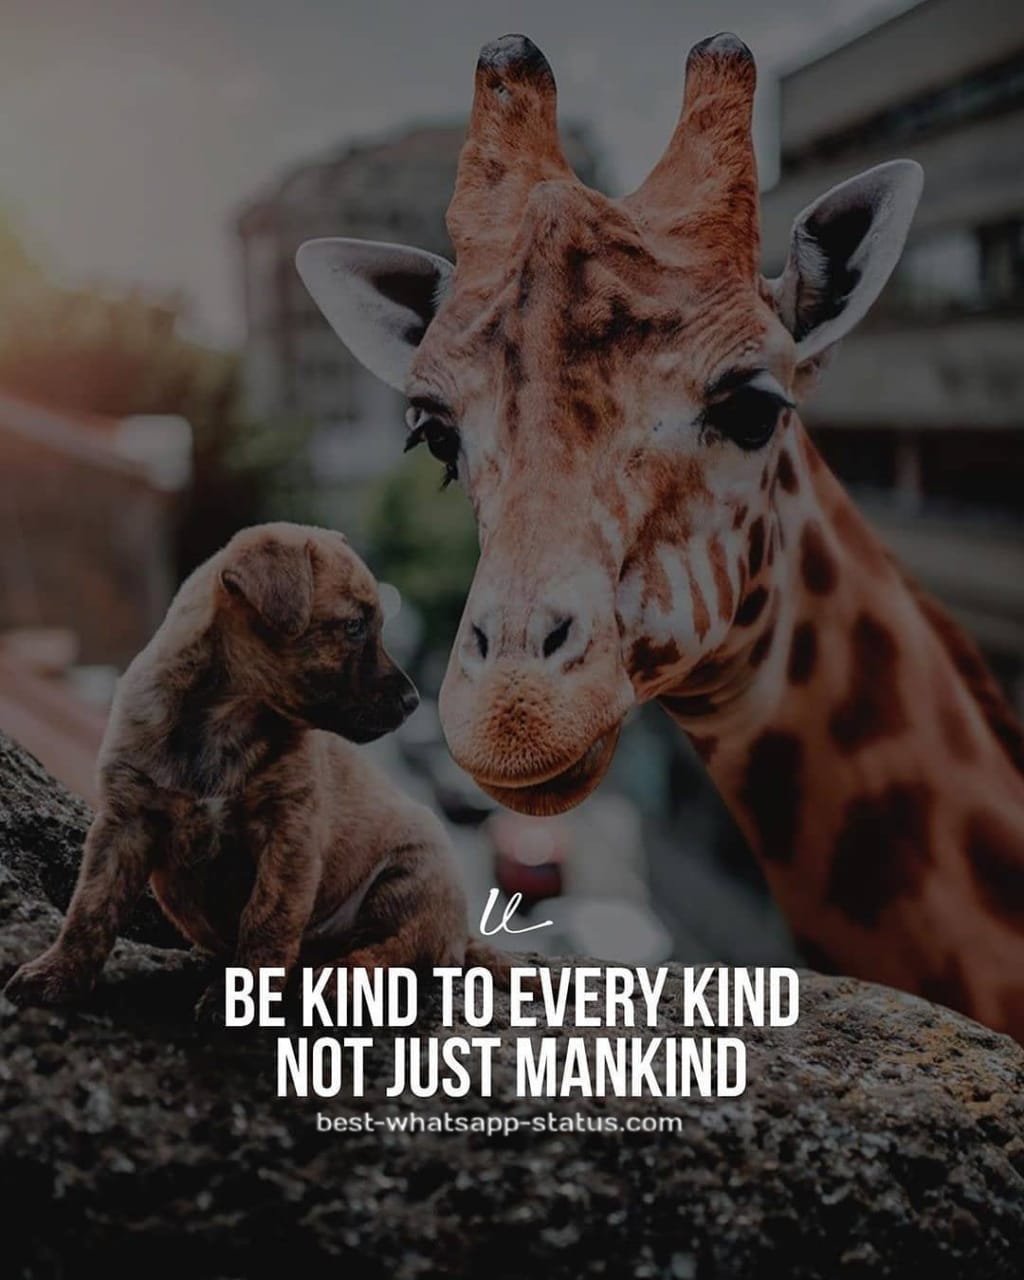 [50]+ Best Animal Lover Quotes That touch your Heart